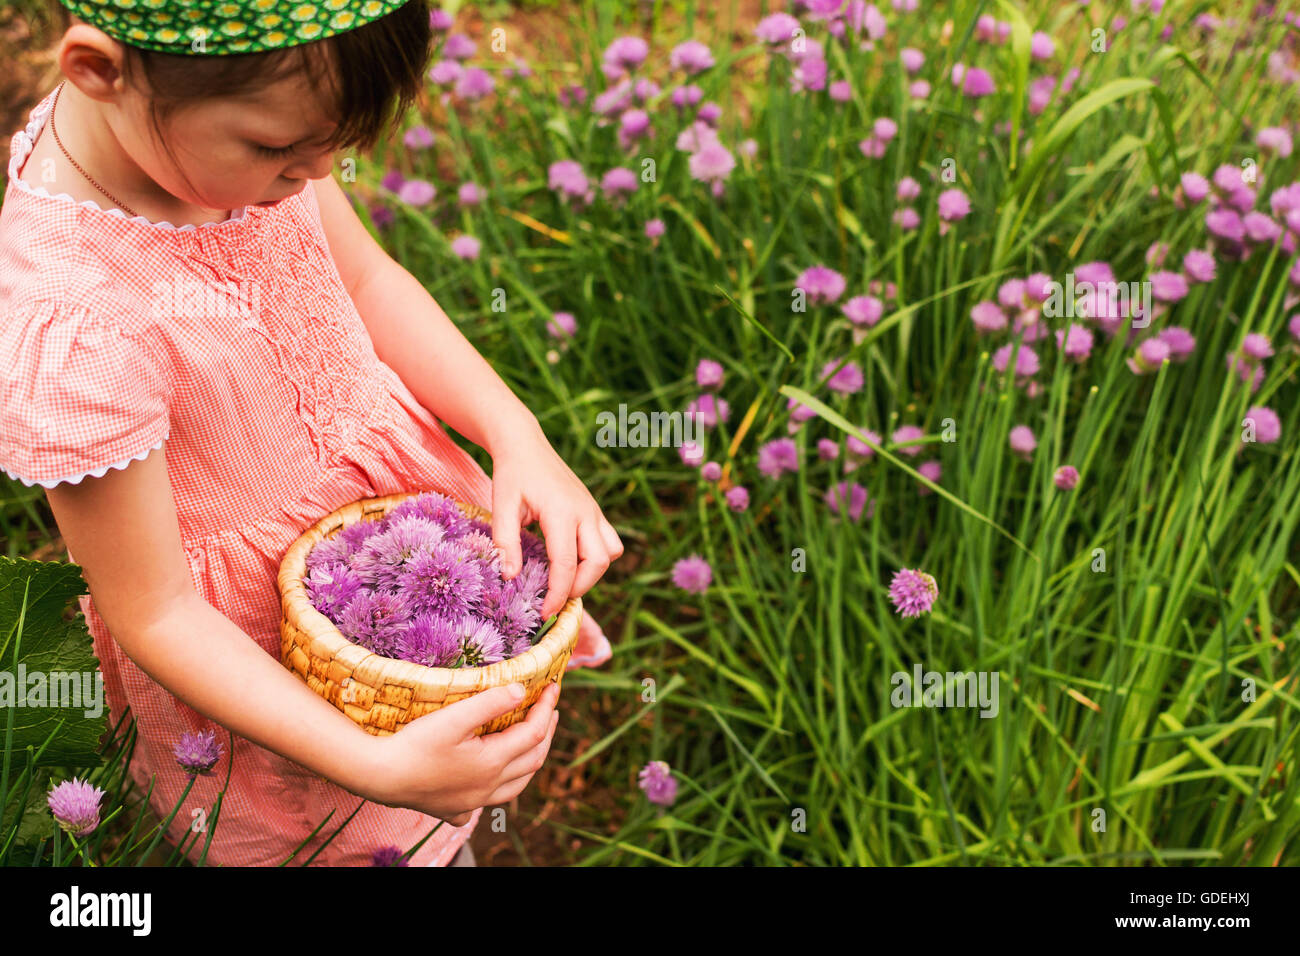 Young girl harvesting chive blossoms in garden Stock Photo